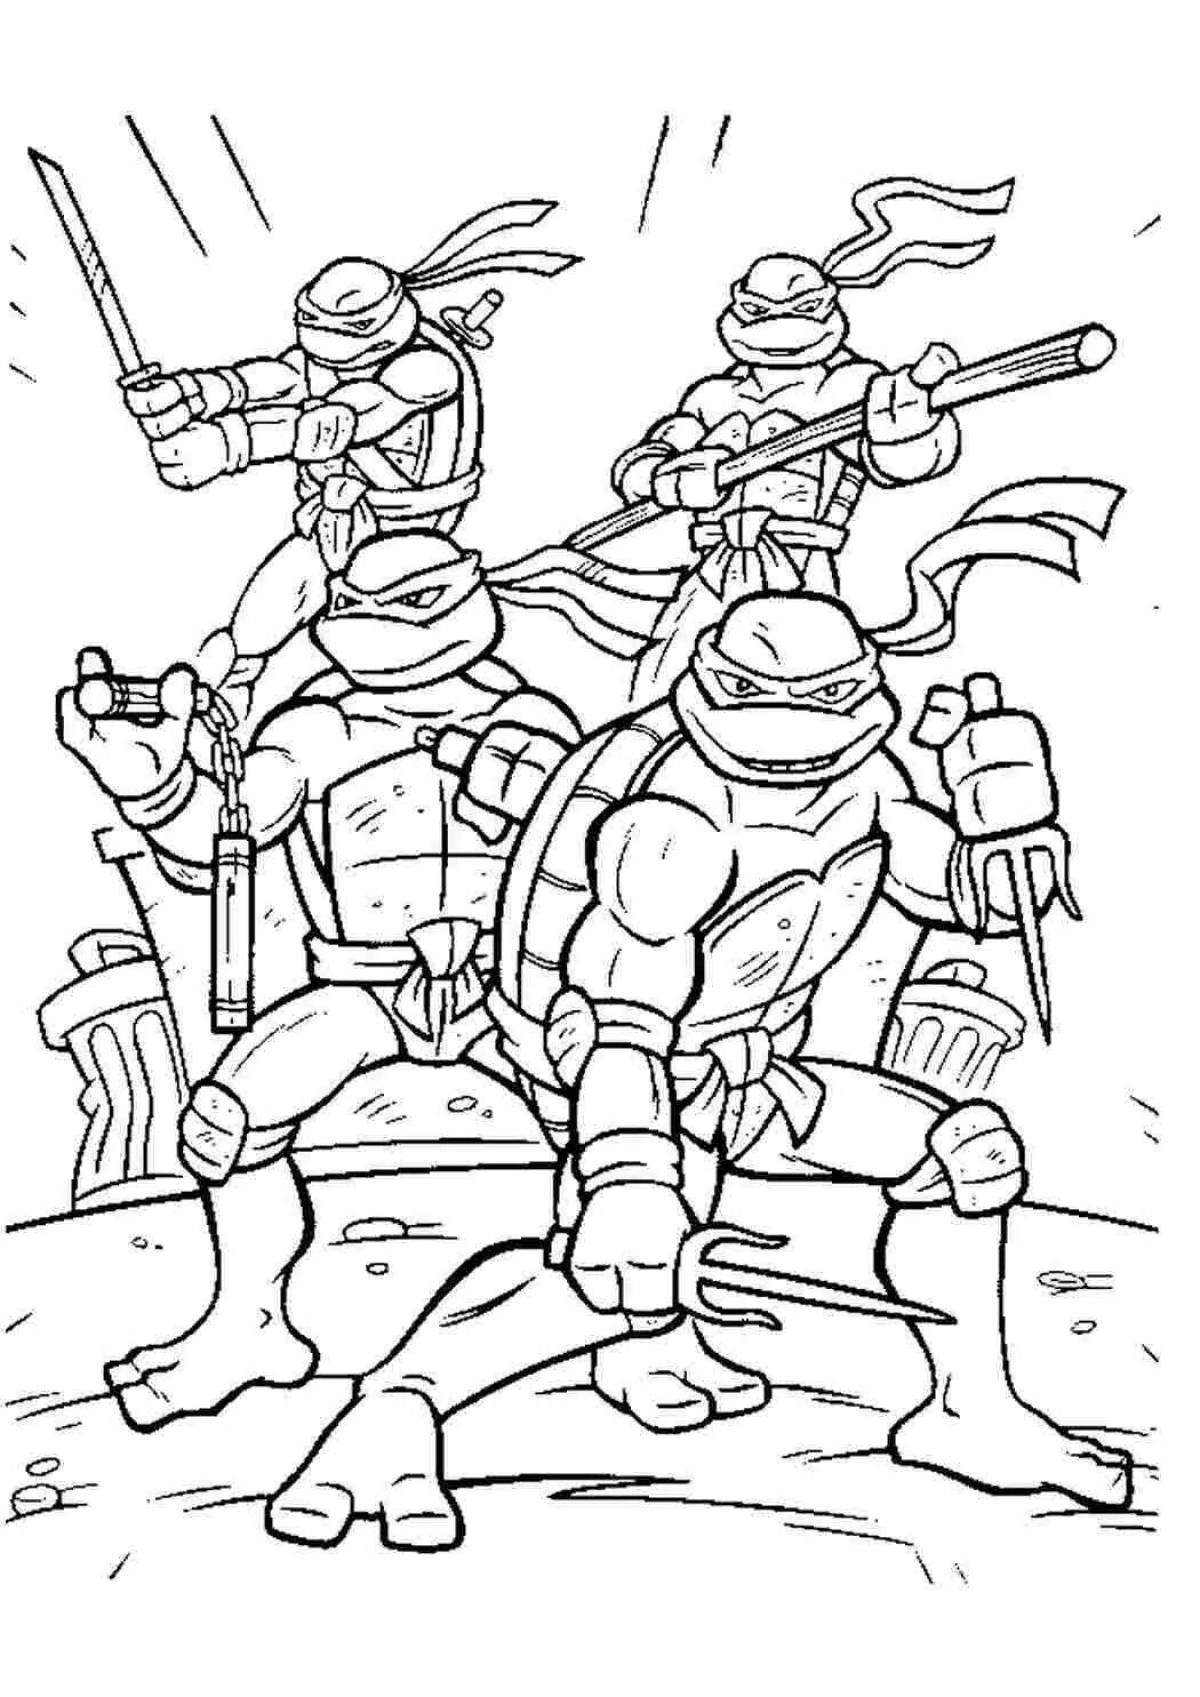 Amazing Teenage Mutant Ninja Turtles Coloring Pages for 5 year olds